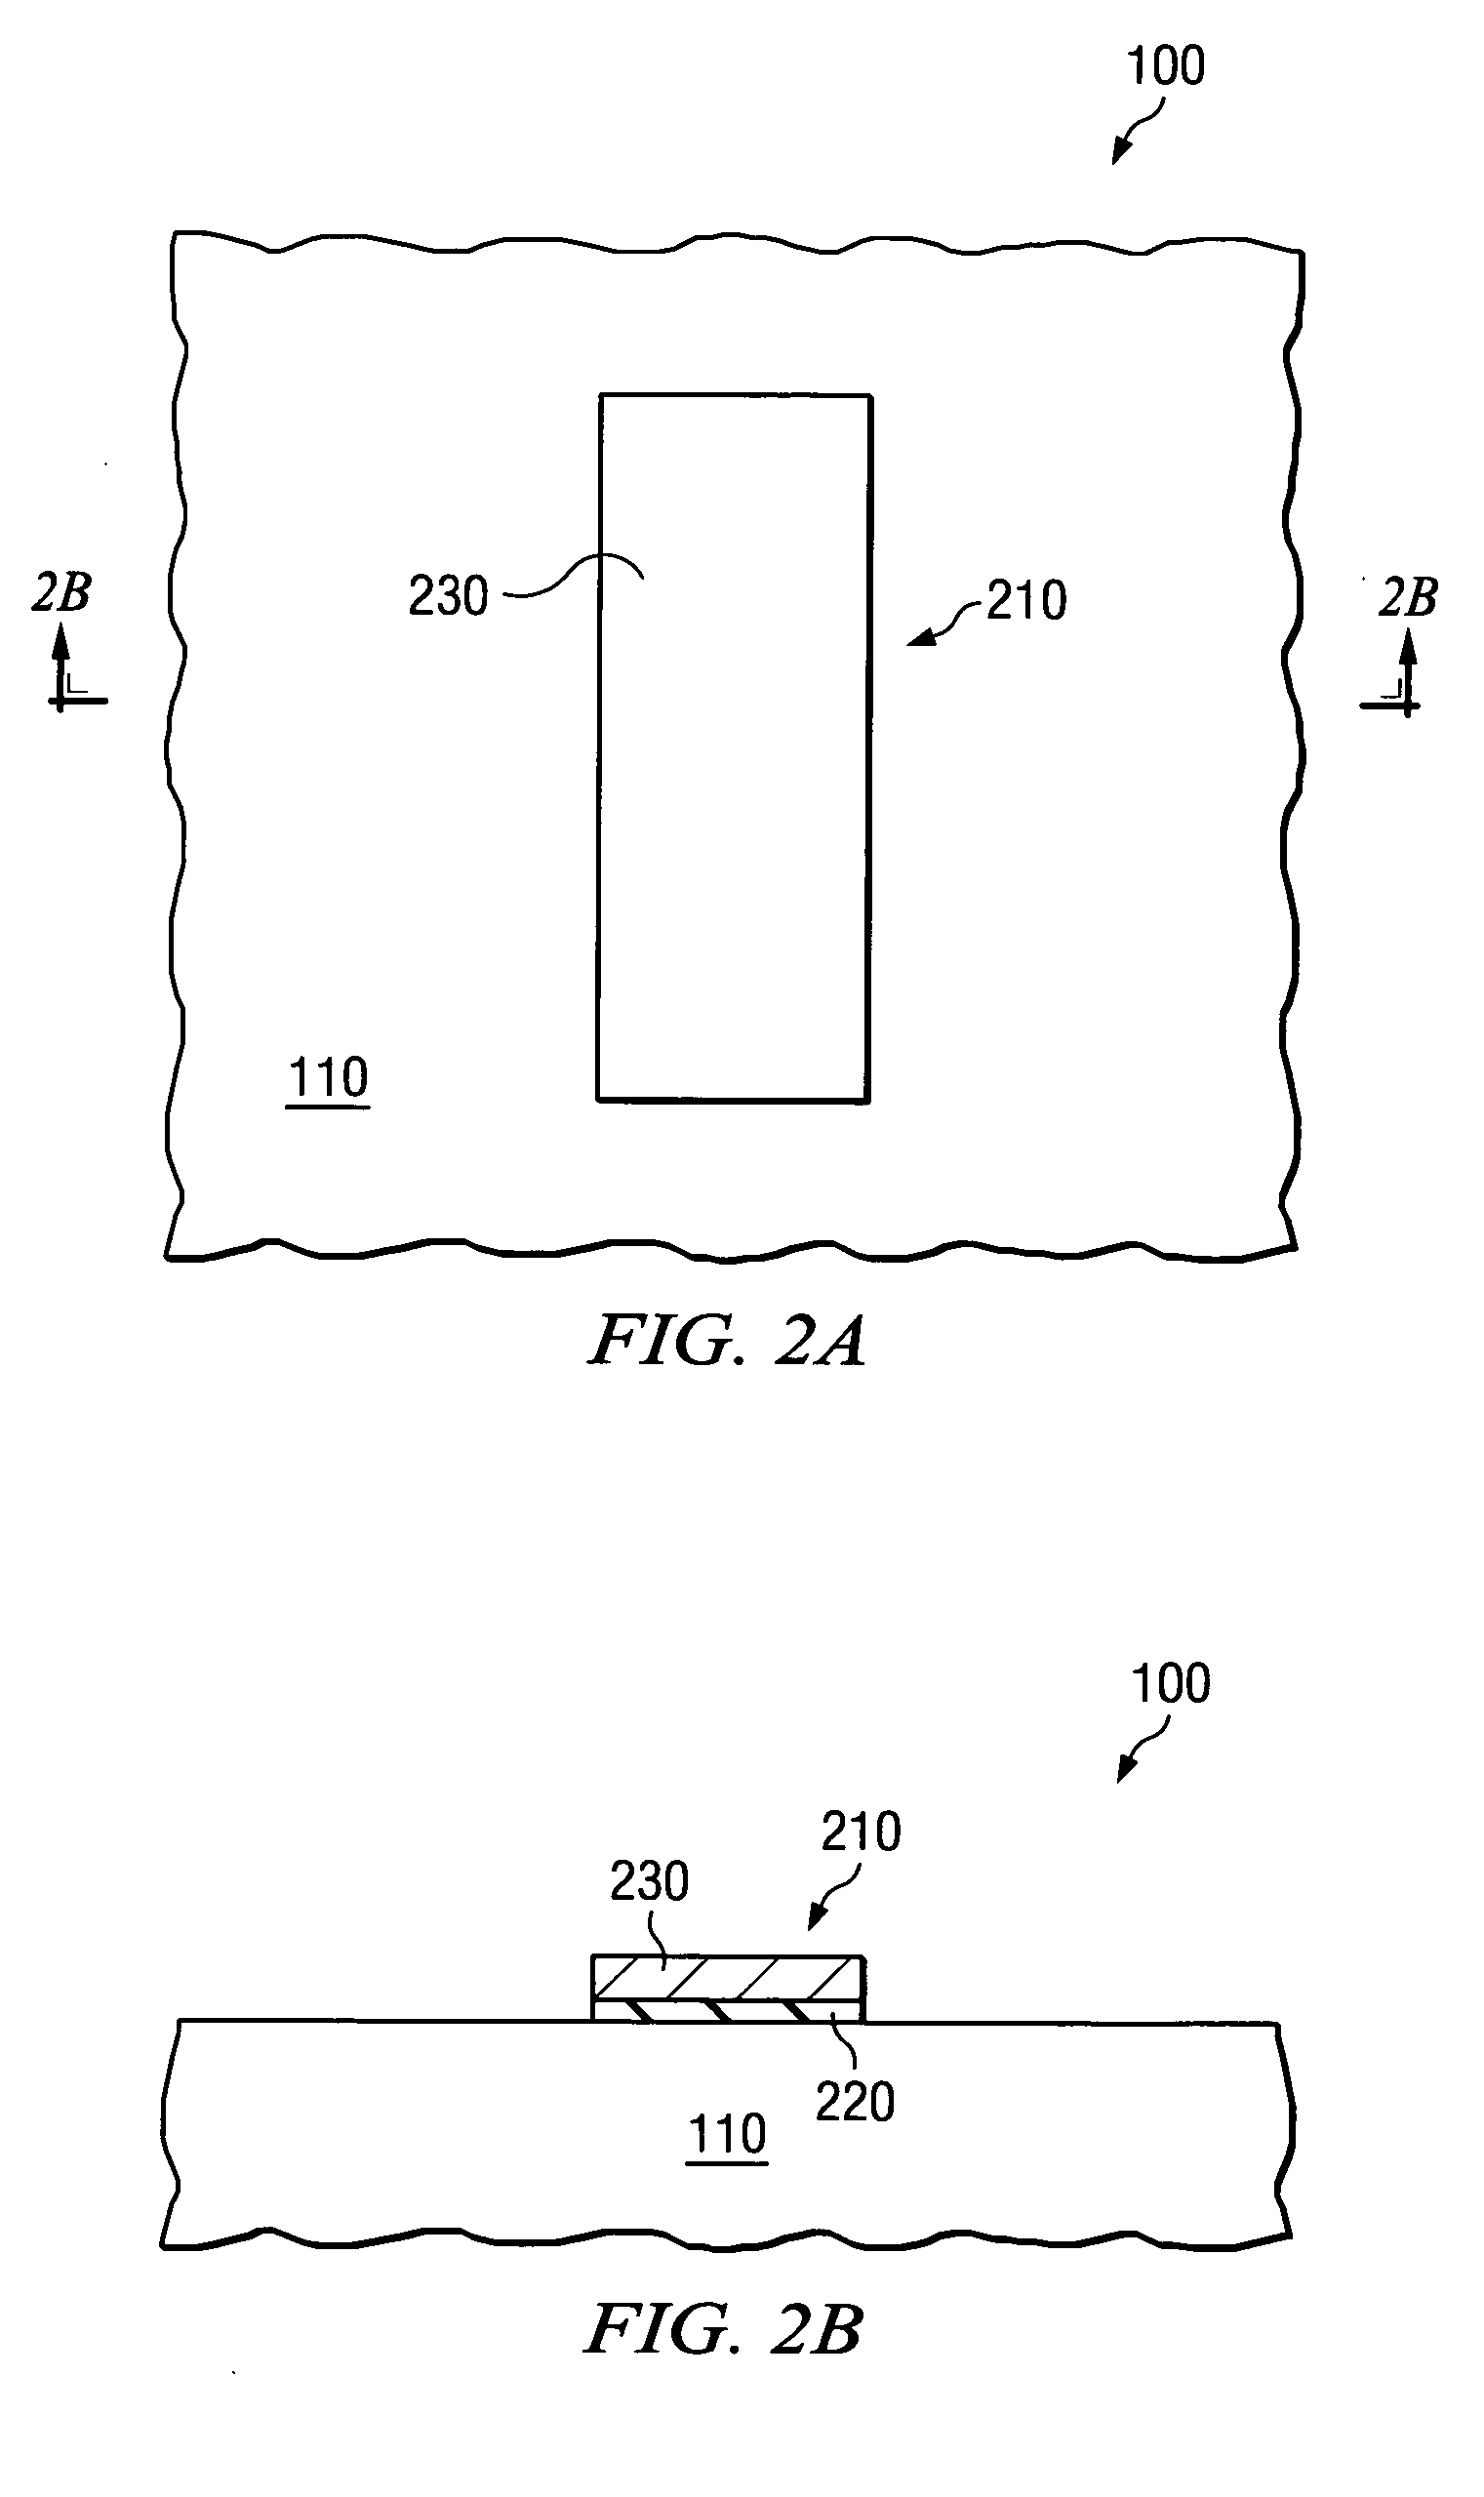 Transistor design self-aligned to contact